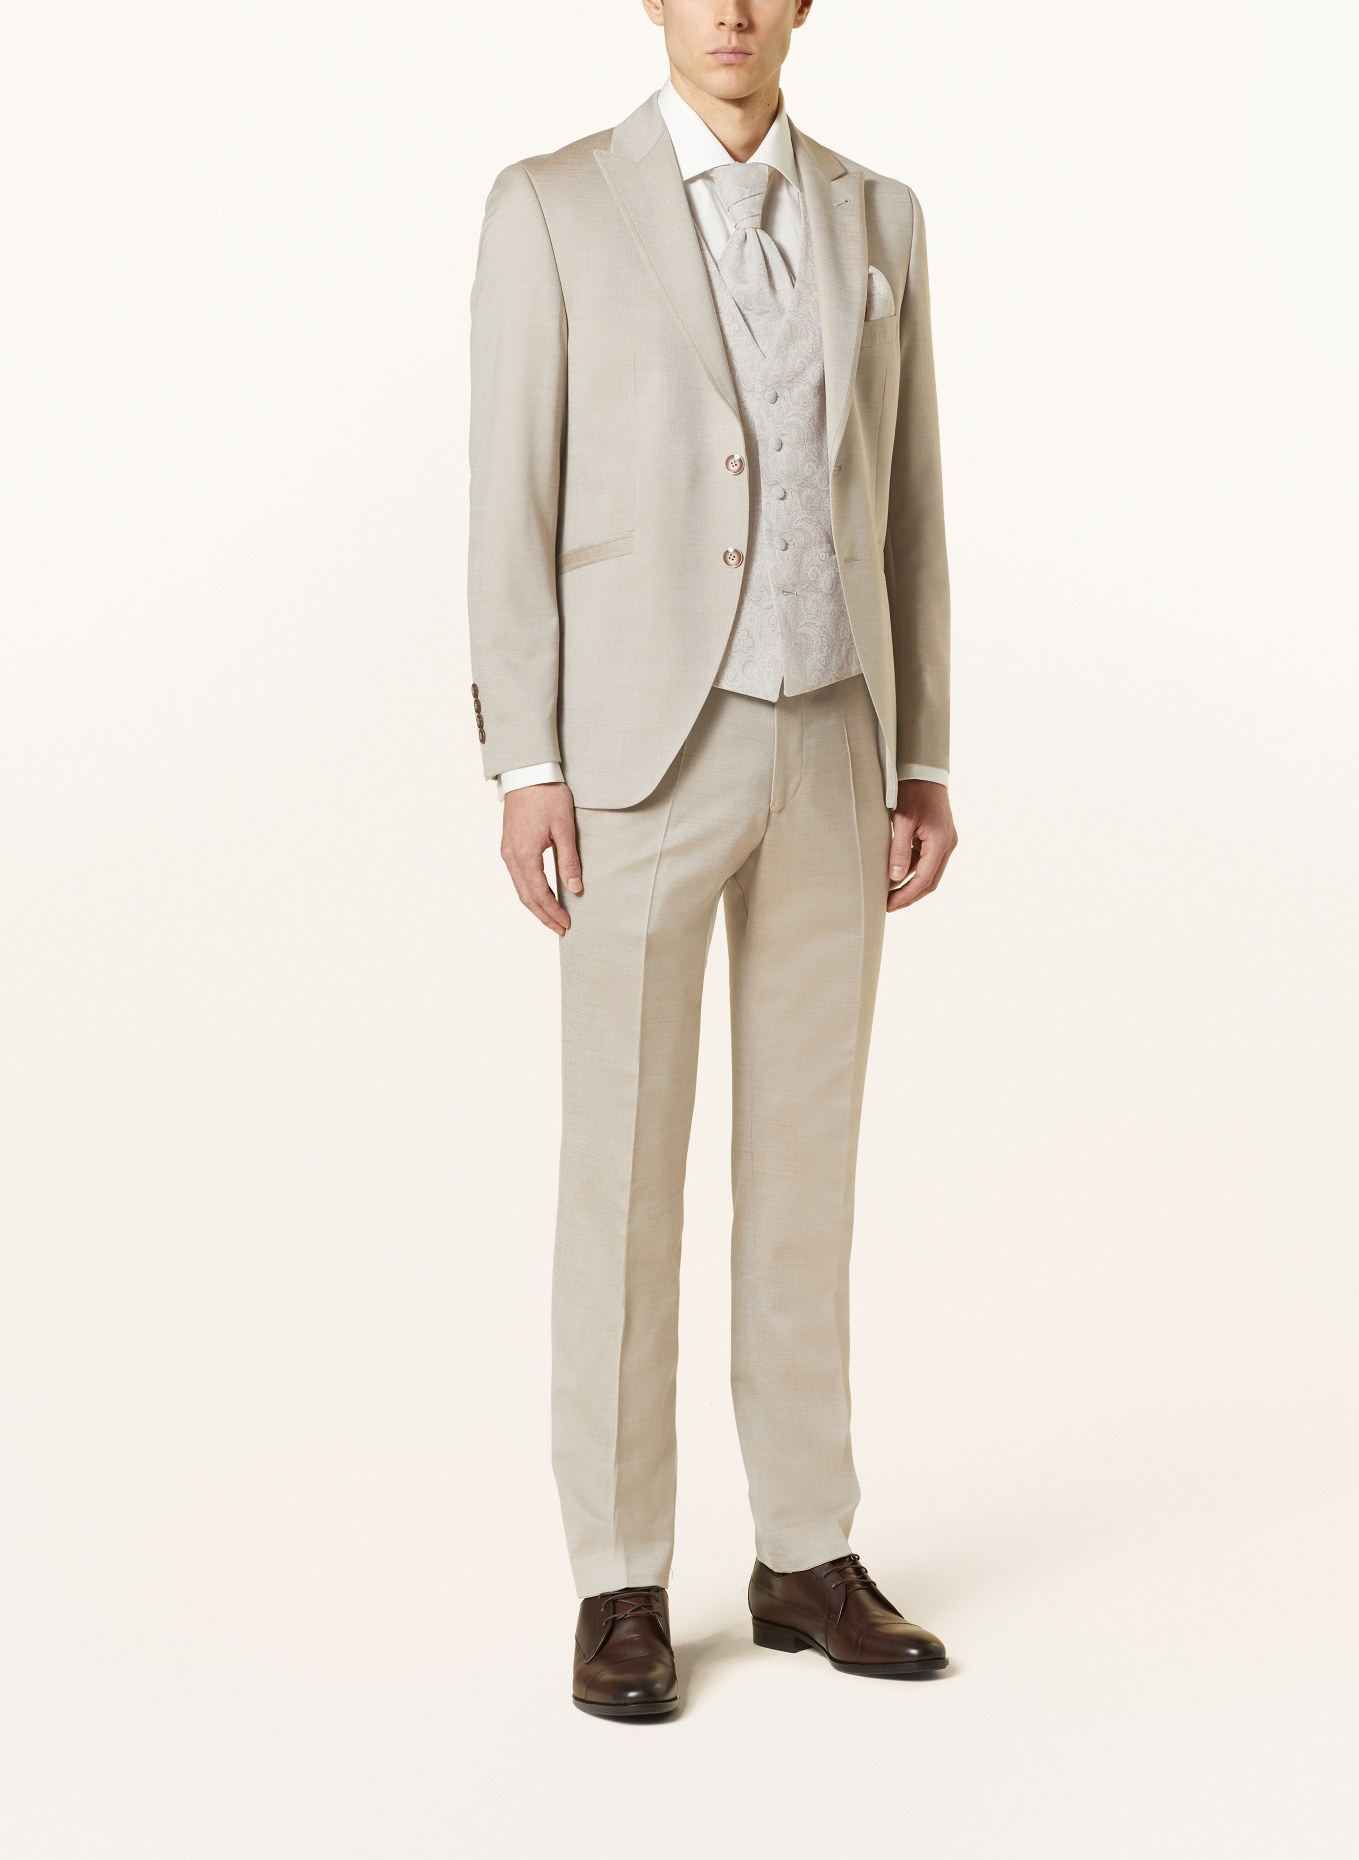 WILVORST Tailored jacket extra slim fit, Color: 068 Cappuccino (Image 2)